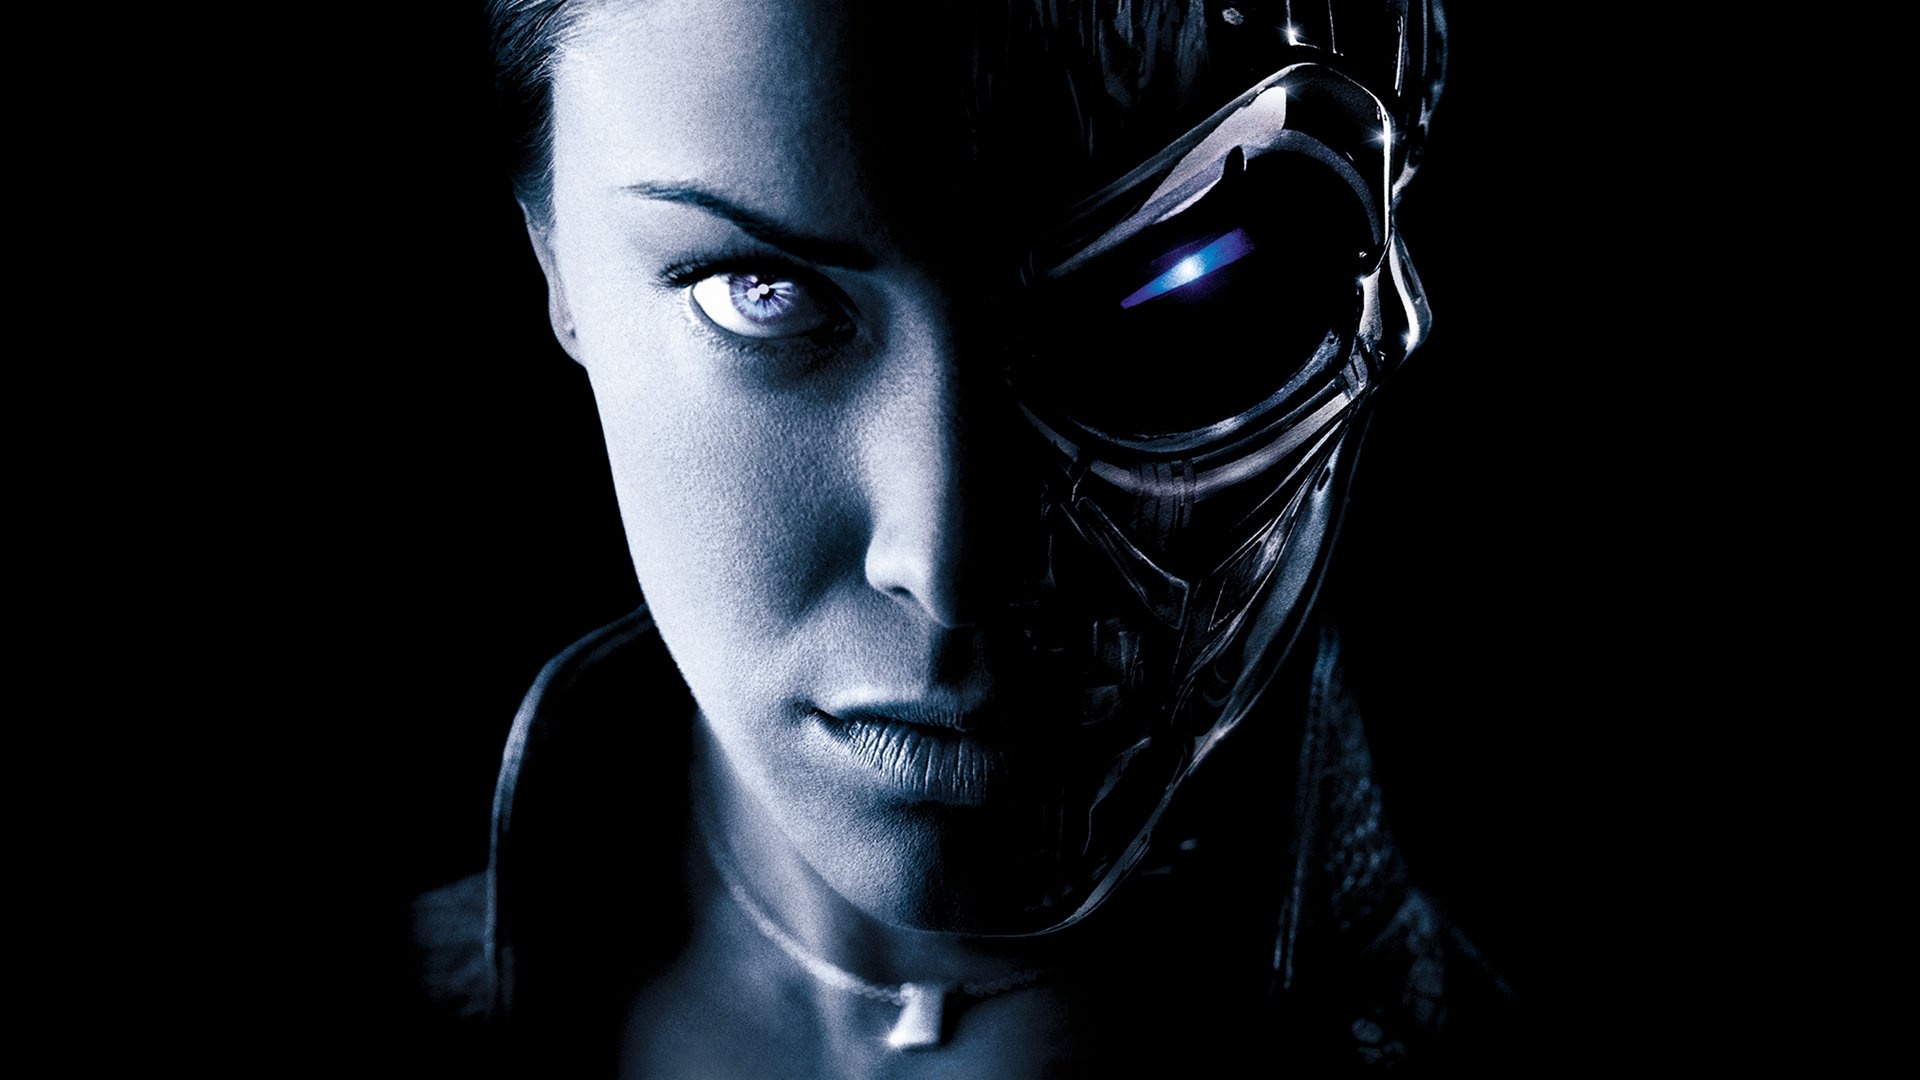 Terminator 3 HD wallpapers, High-intensity chase, End of the world, Machine rebellion, 1920x1080 Full HD Desktop